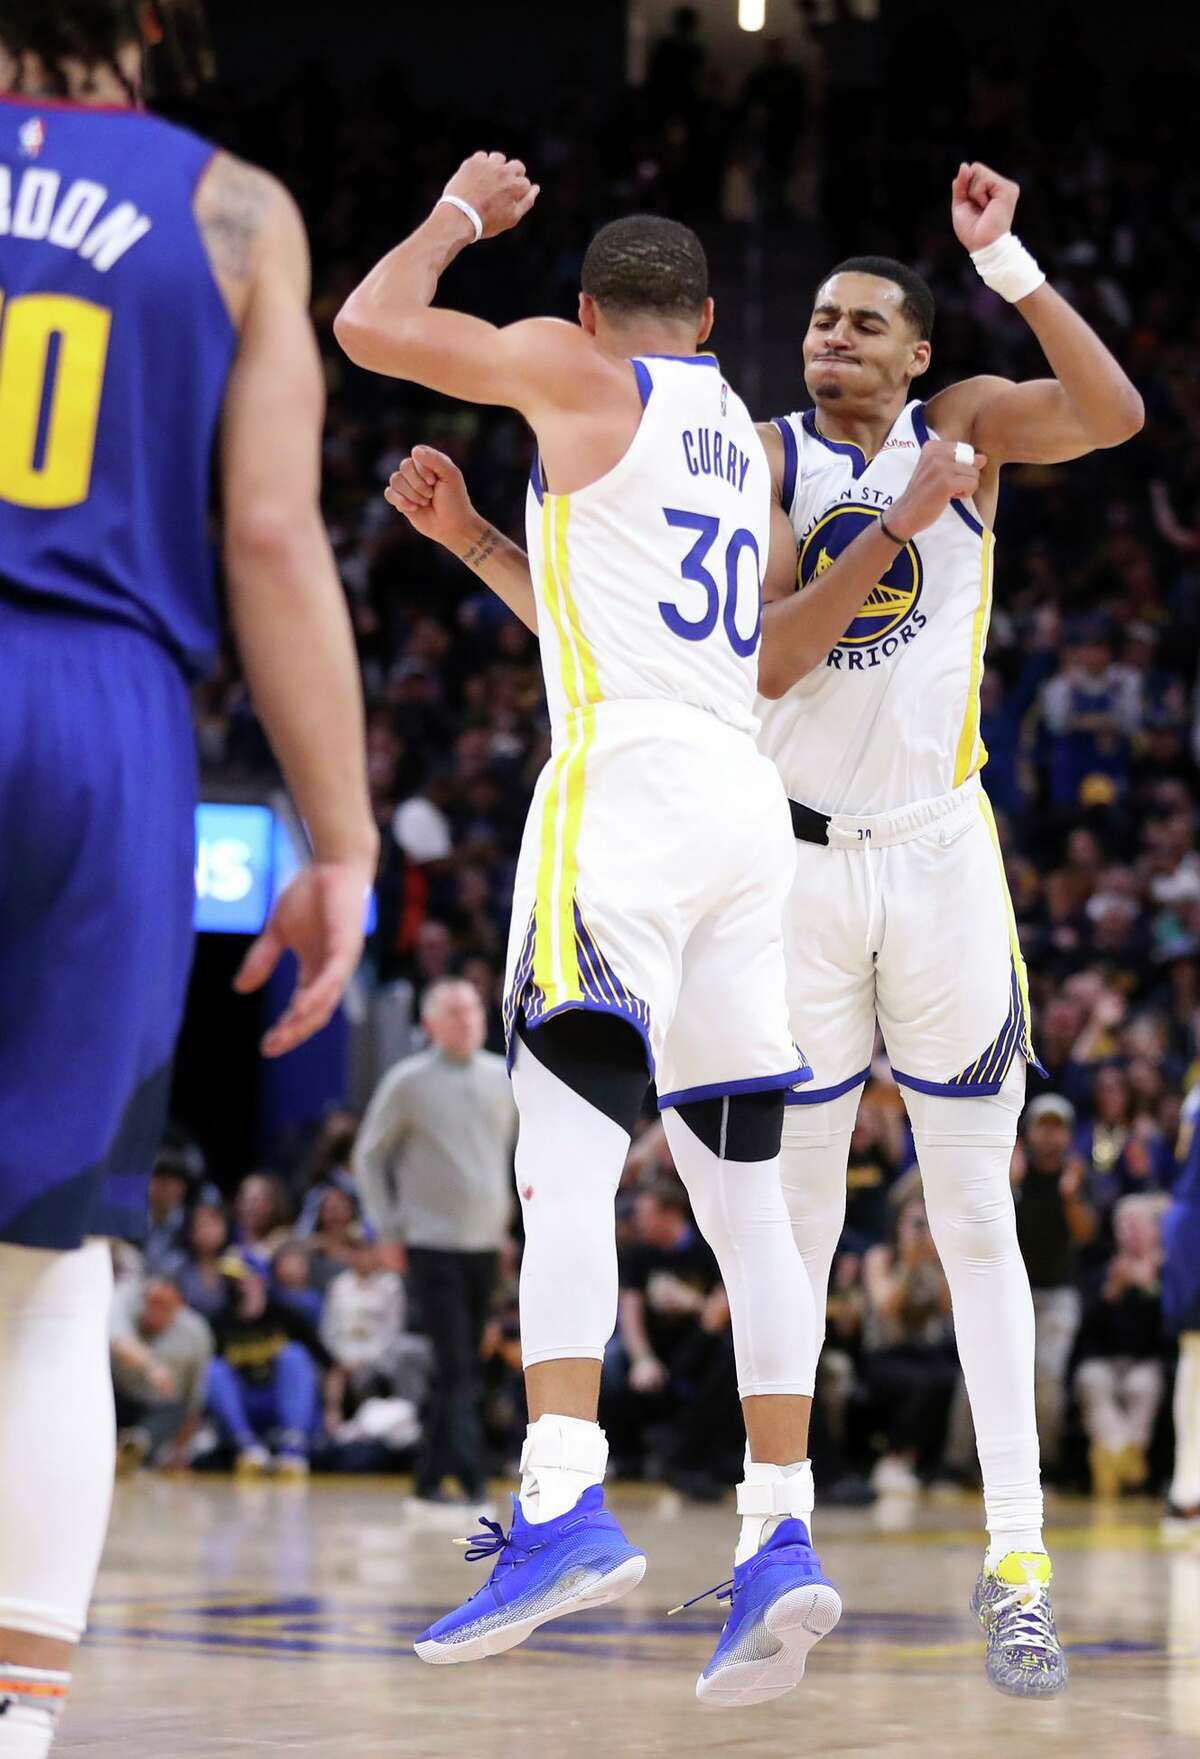 Warriors guards Jordan Poole and Stephen Curry celebrate Curry’s basket in the fourth quarter of a 126-106 win over the Denver Nuggets in Game 2 of their first-round series.